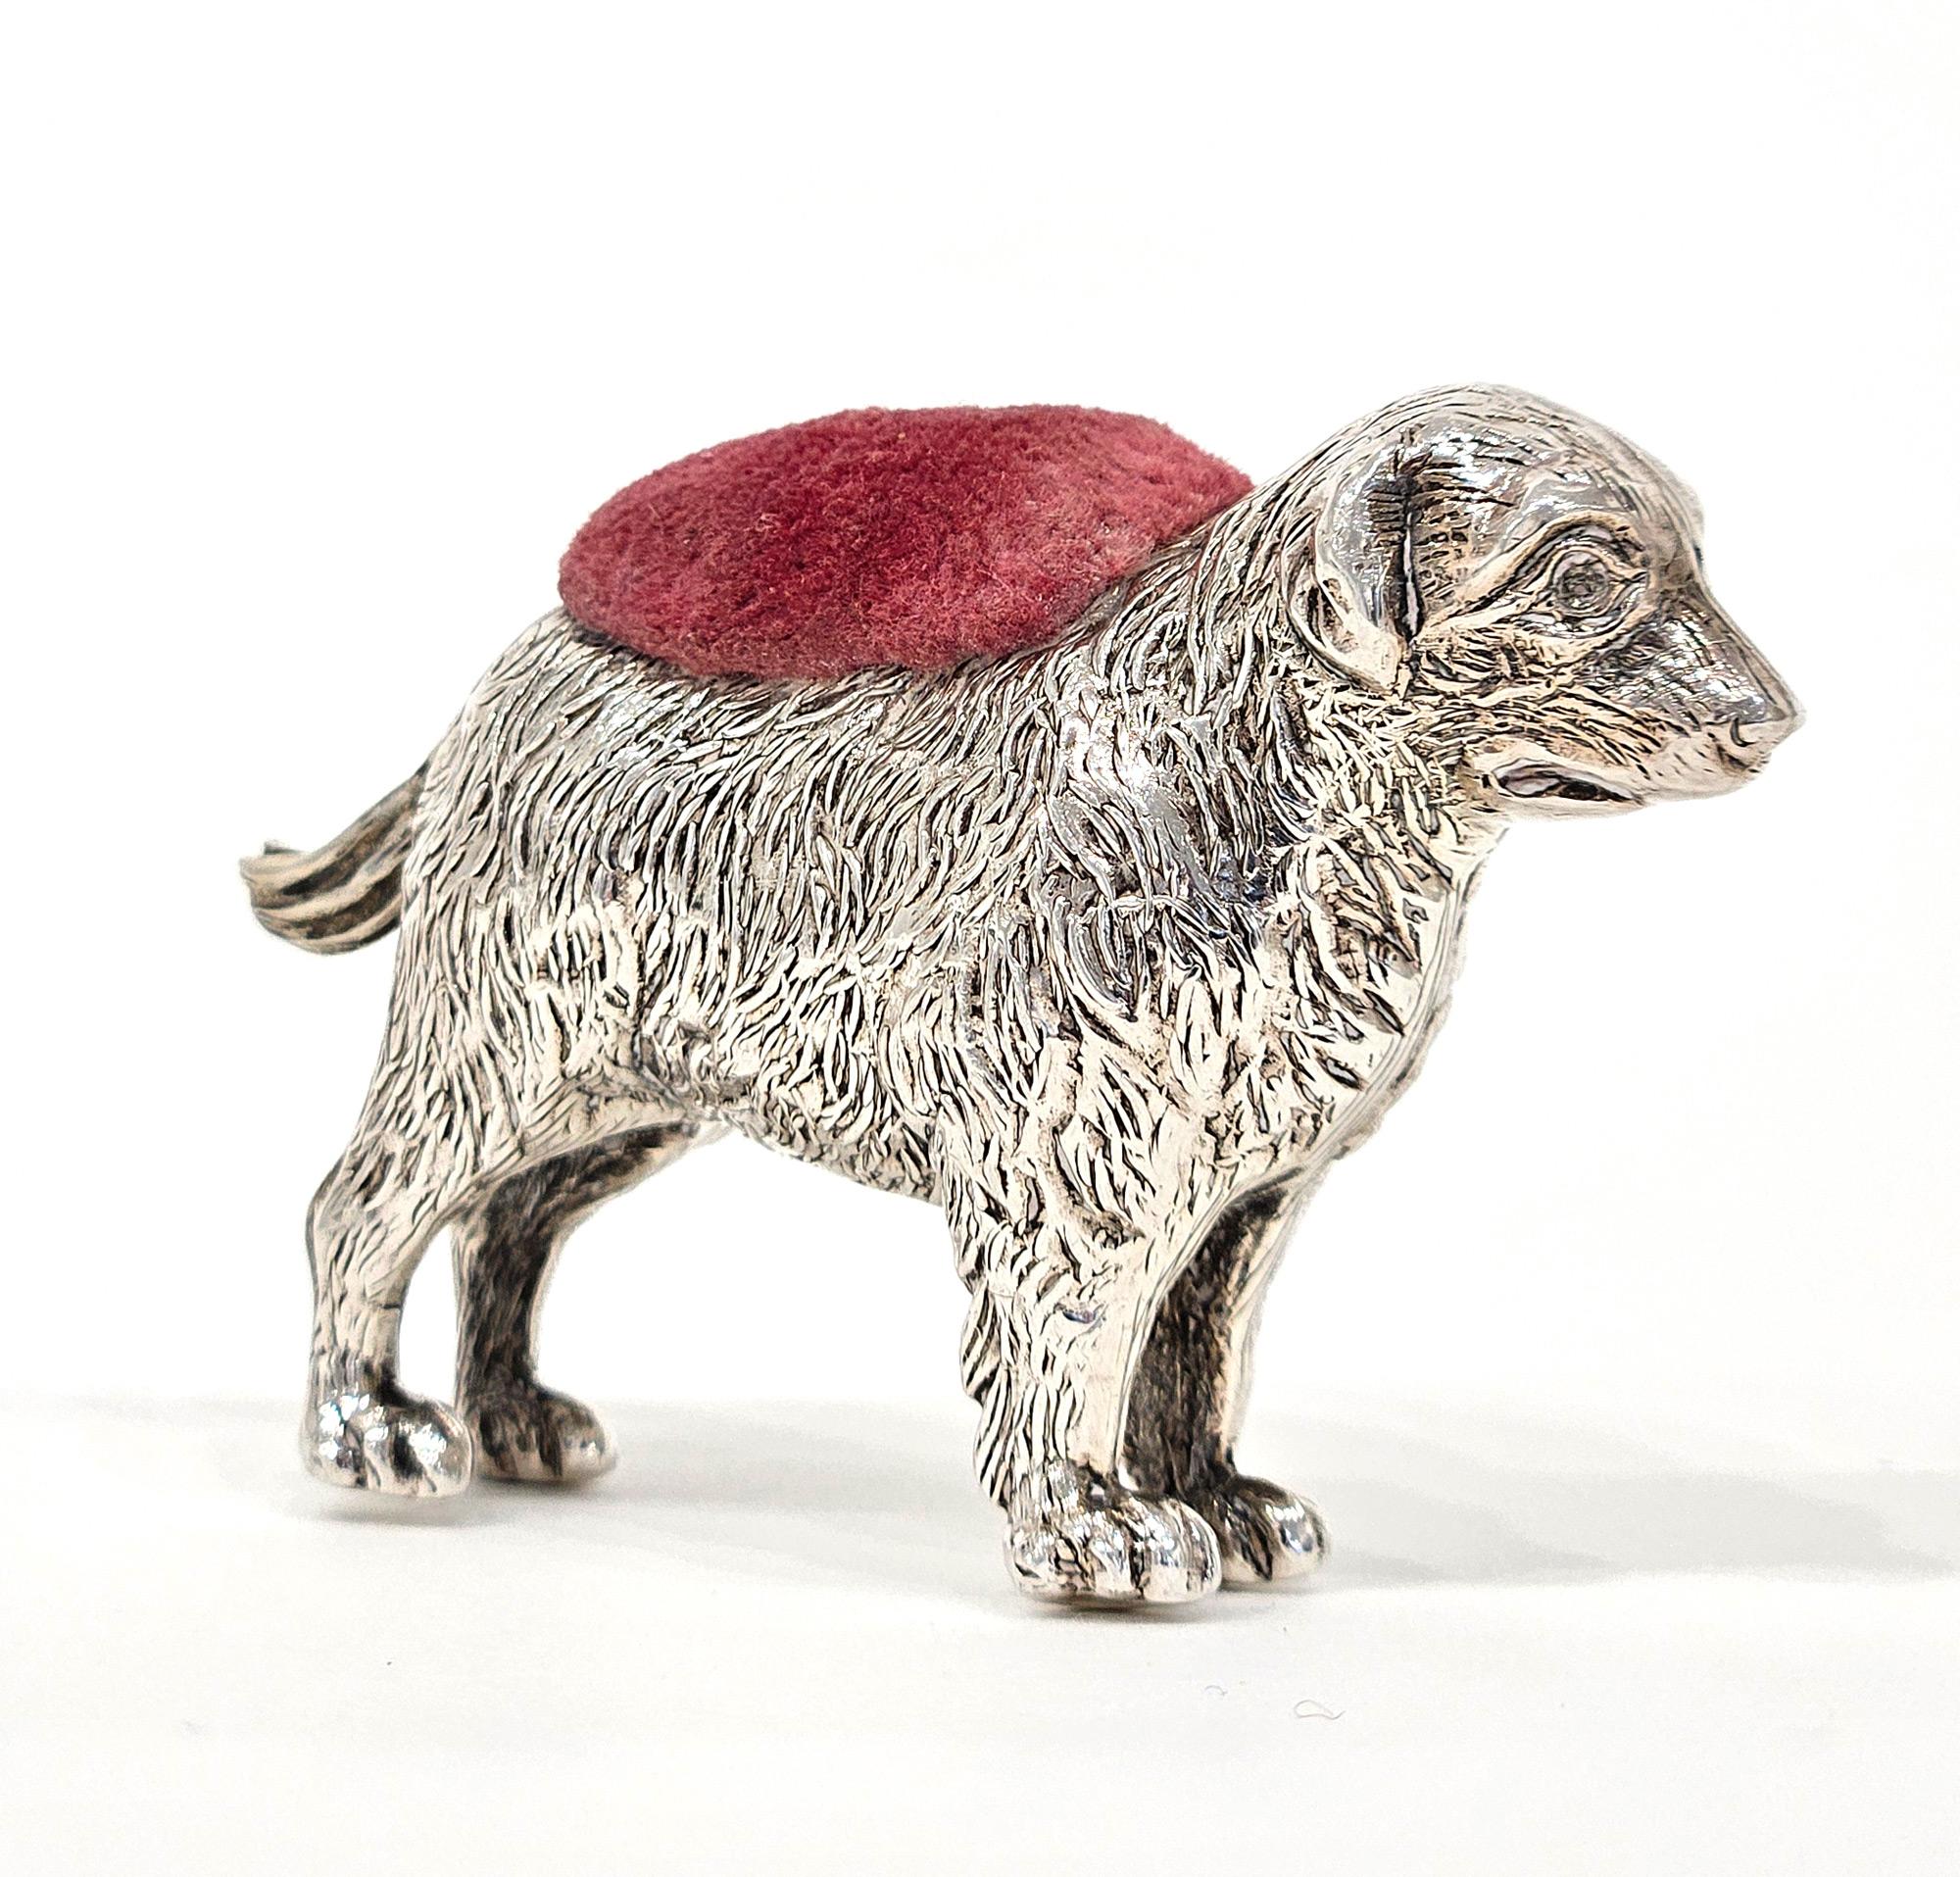 A very rare and highly collectible Edwardian novelty silver pin cushion in the form of a dog, made by Adie & Lovekin in Birmingham in 1909. The dog is very delicately modelled in sterling silver. It is usually considered to be modelled on a